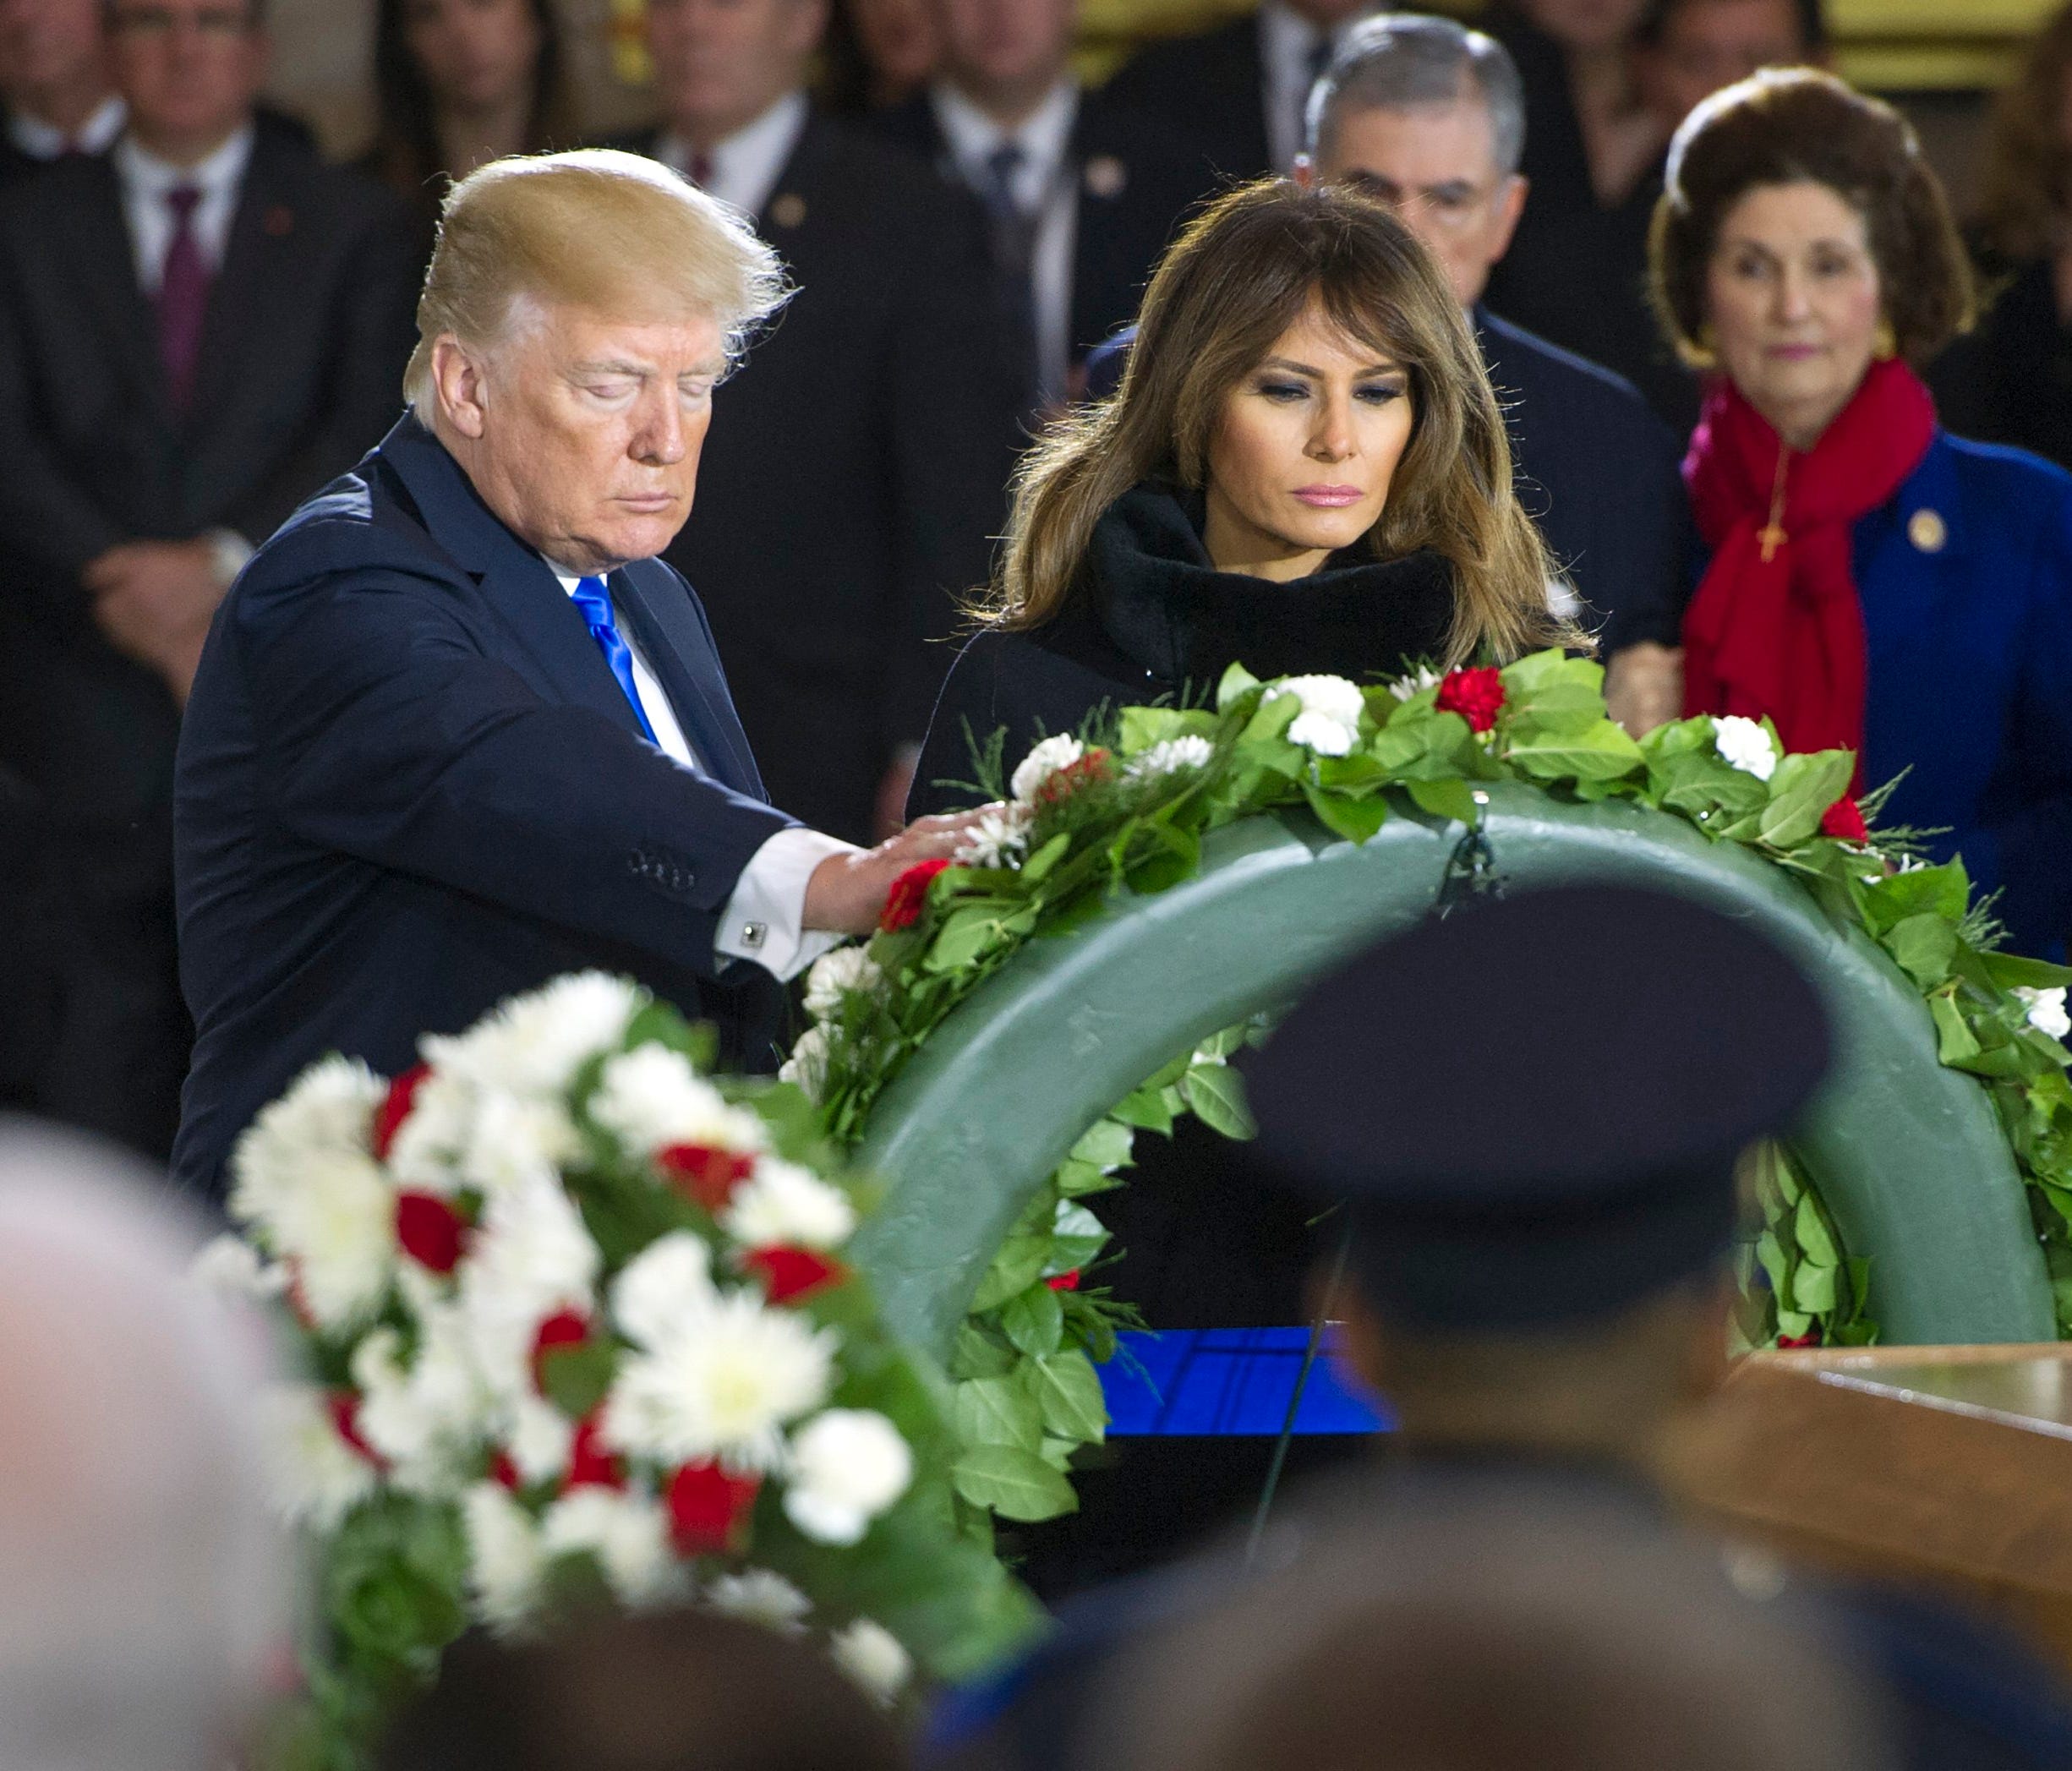 President Donald J. Trump and First Lady Melania Trump lay a wreath during a ceremony for American evangelist Billy Graham as he lies in honor in the Rotunda of the US Capitol in Washington, DC on Feb. 28, 2018.